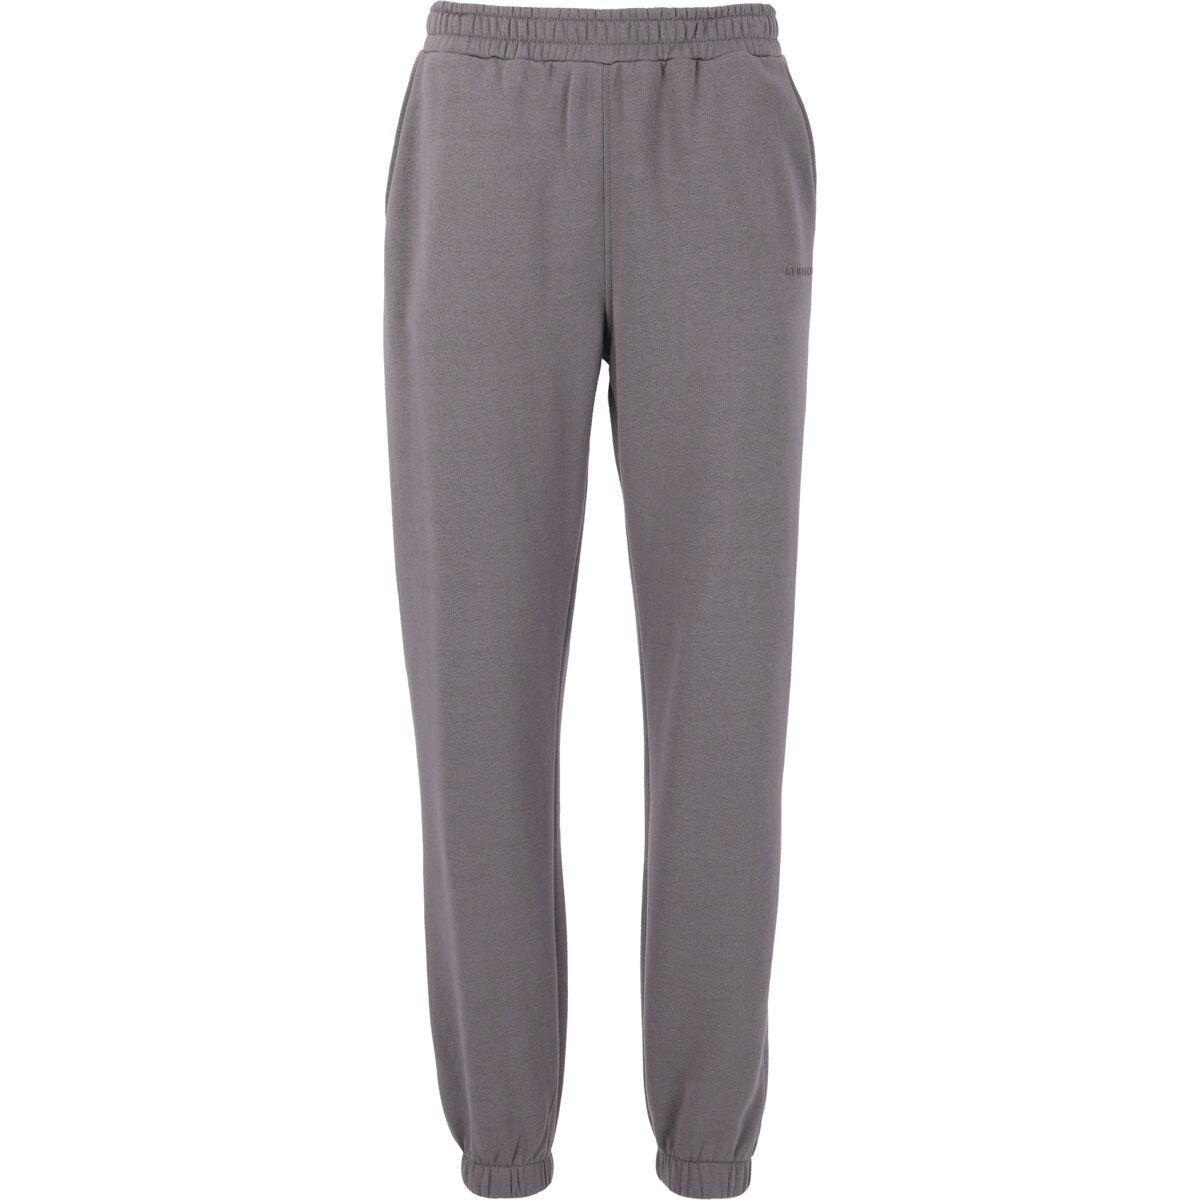 Athlecia Ruthie Womenswear Sweat Pants 6 Shaws Department Stores